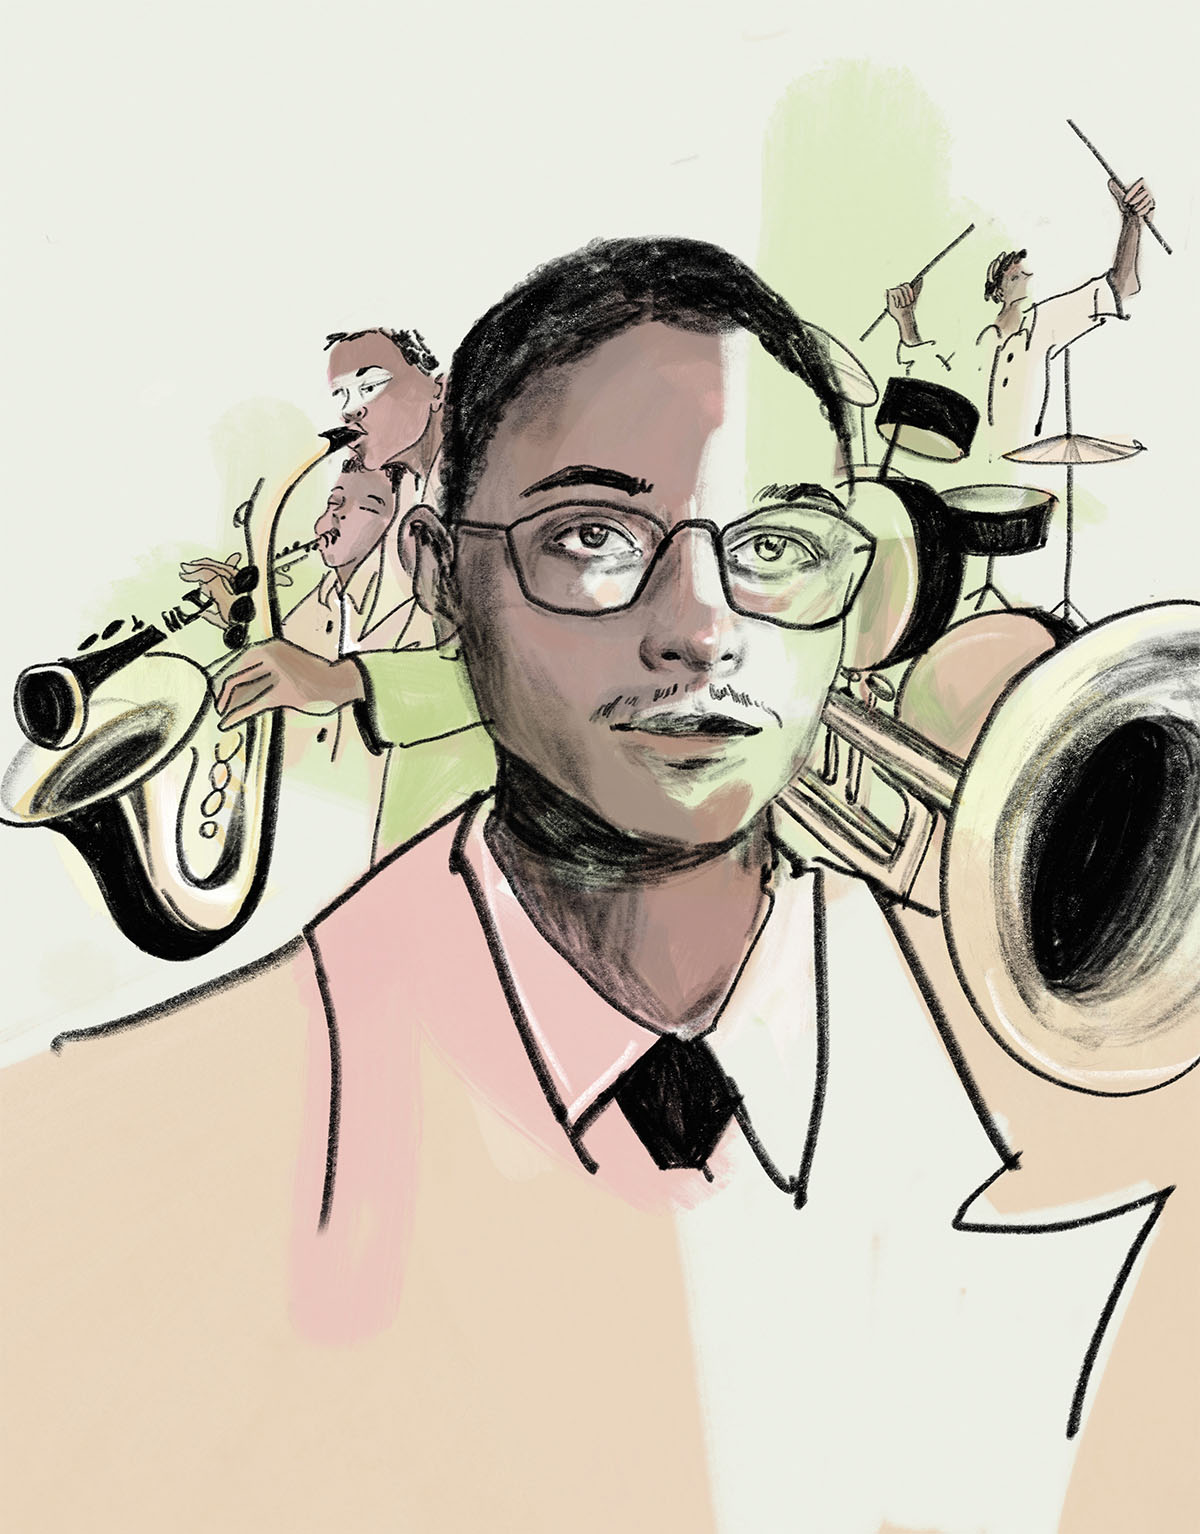 An illustration showing a young man surrounded by trumpets, saxophones and drums